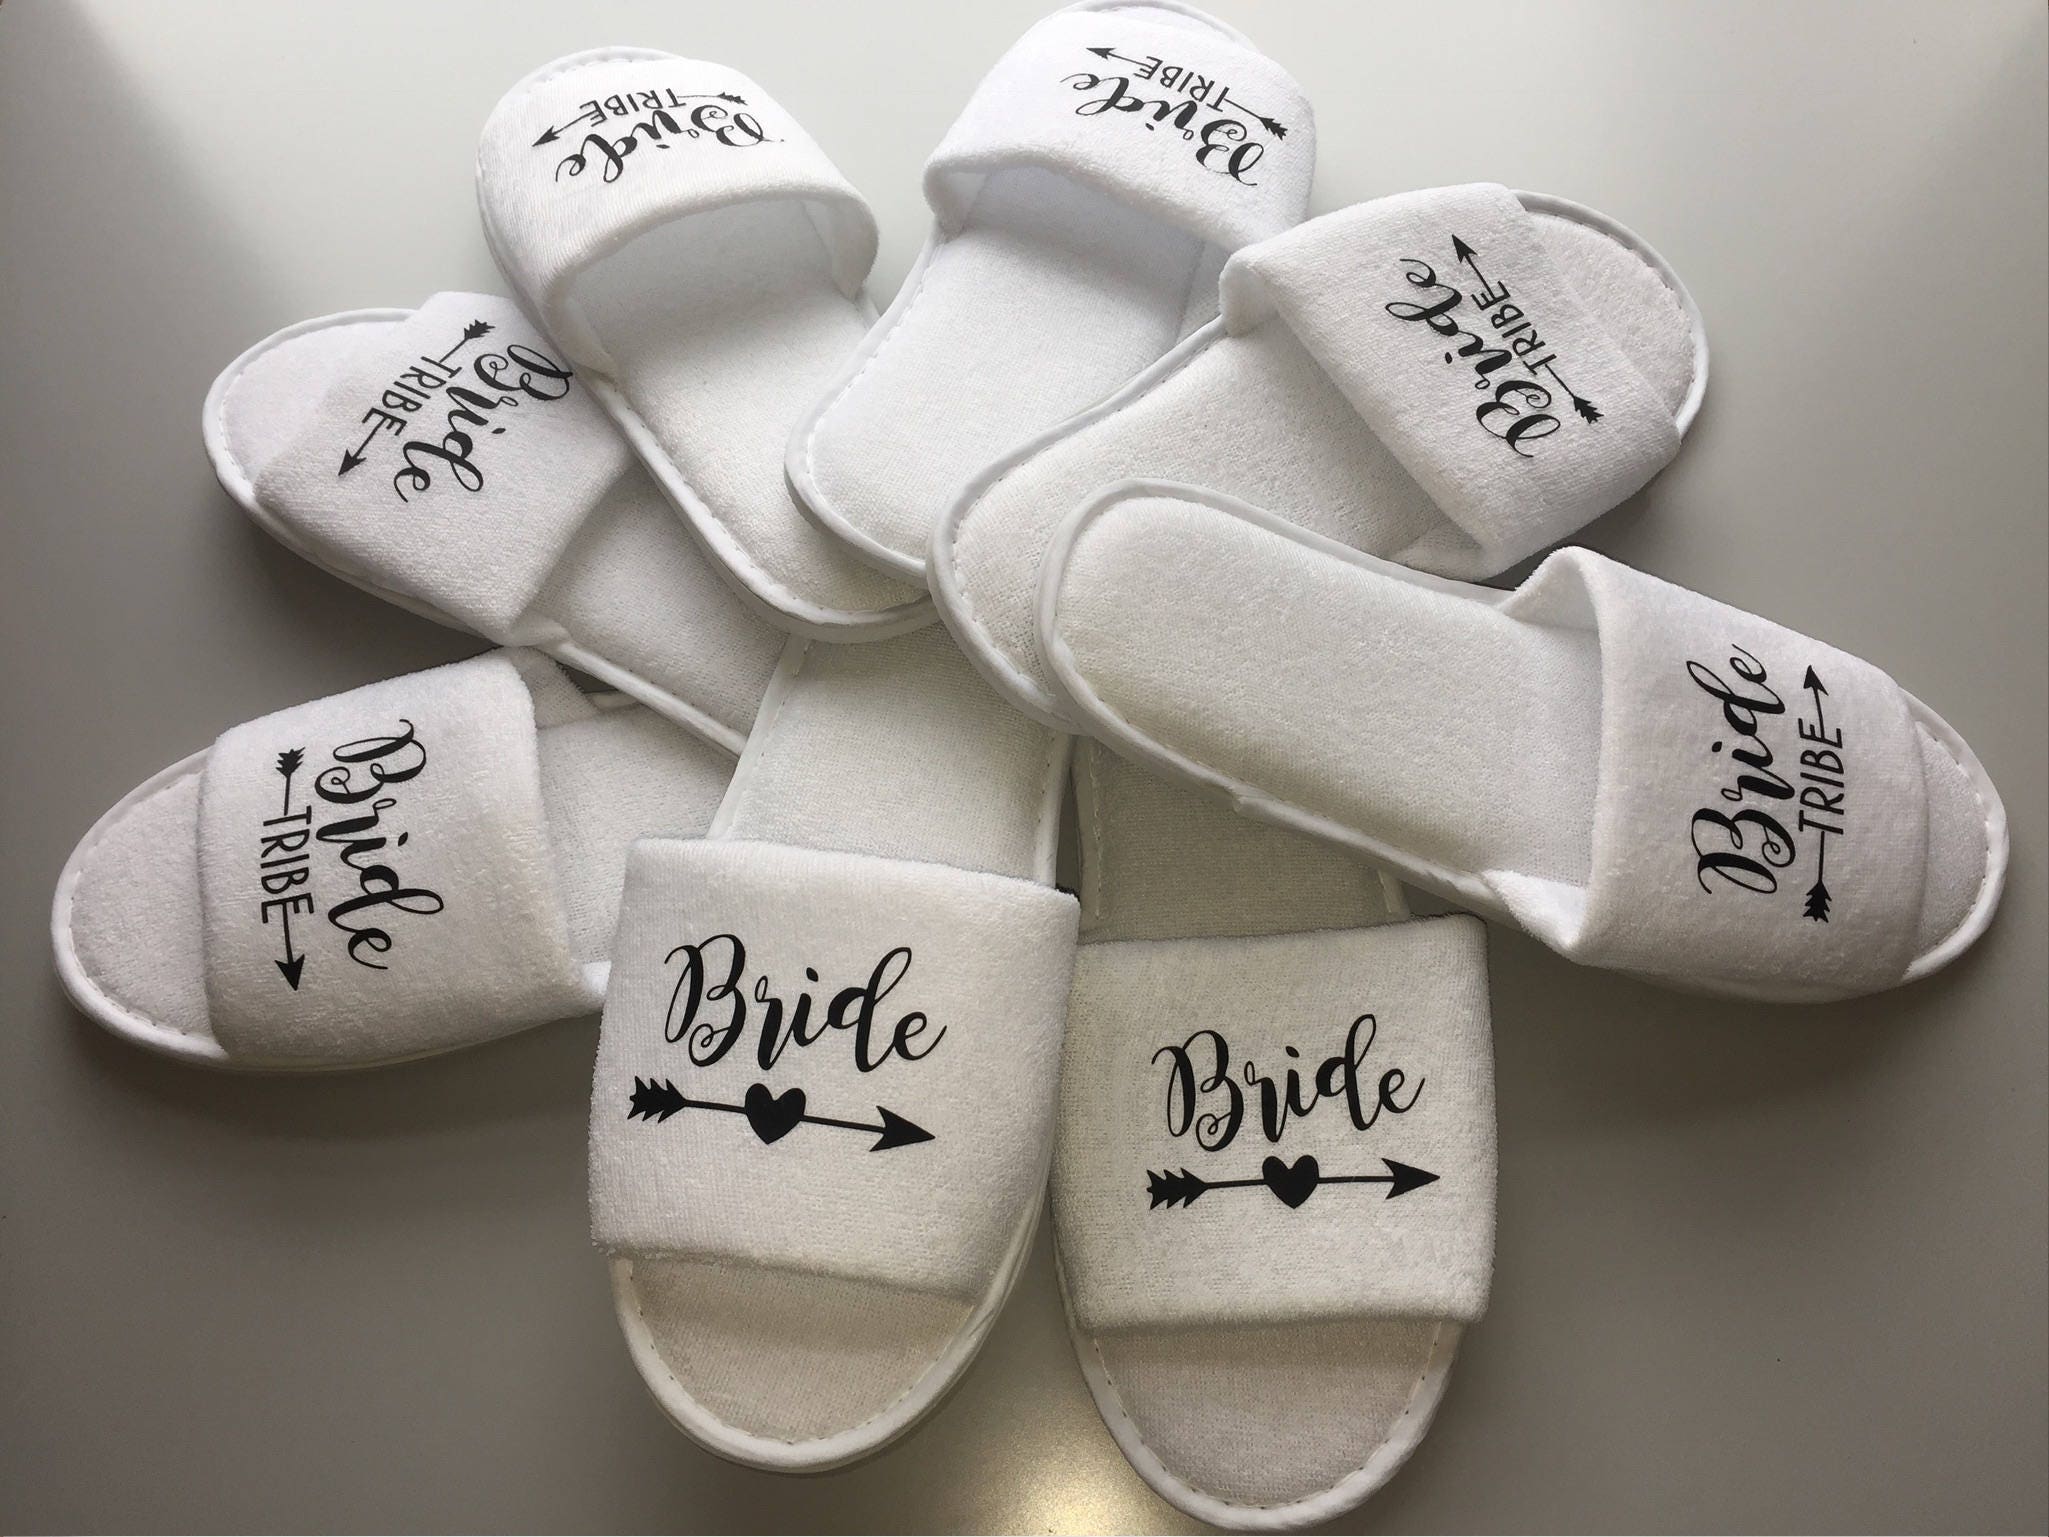 Bride tribe slippers bridesmaid gift personalised slippers | Etsy